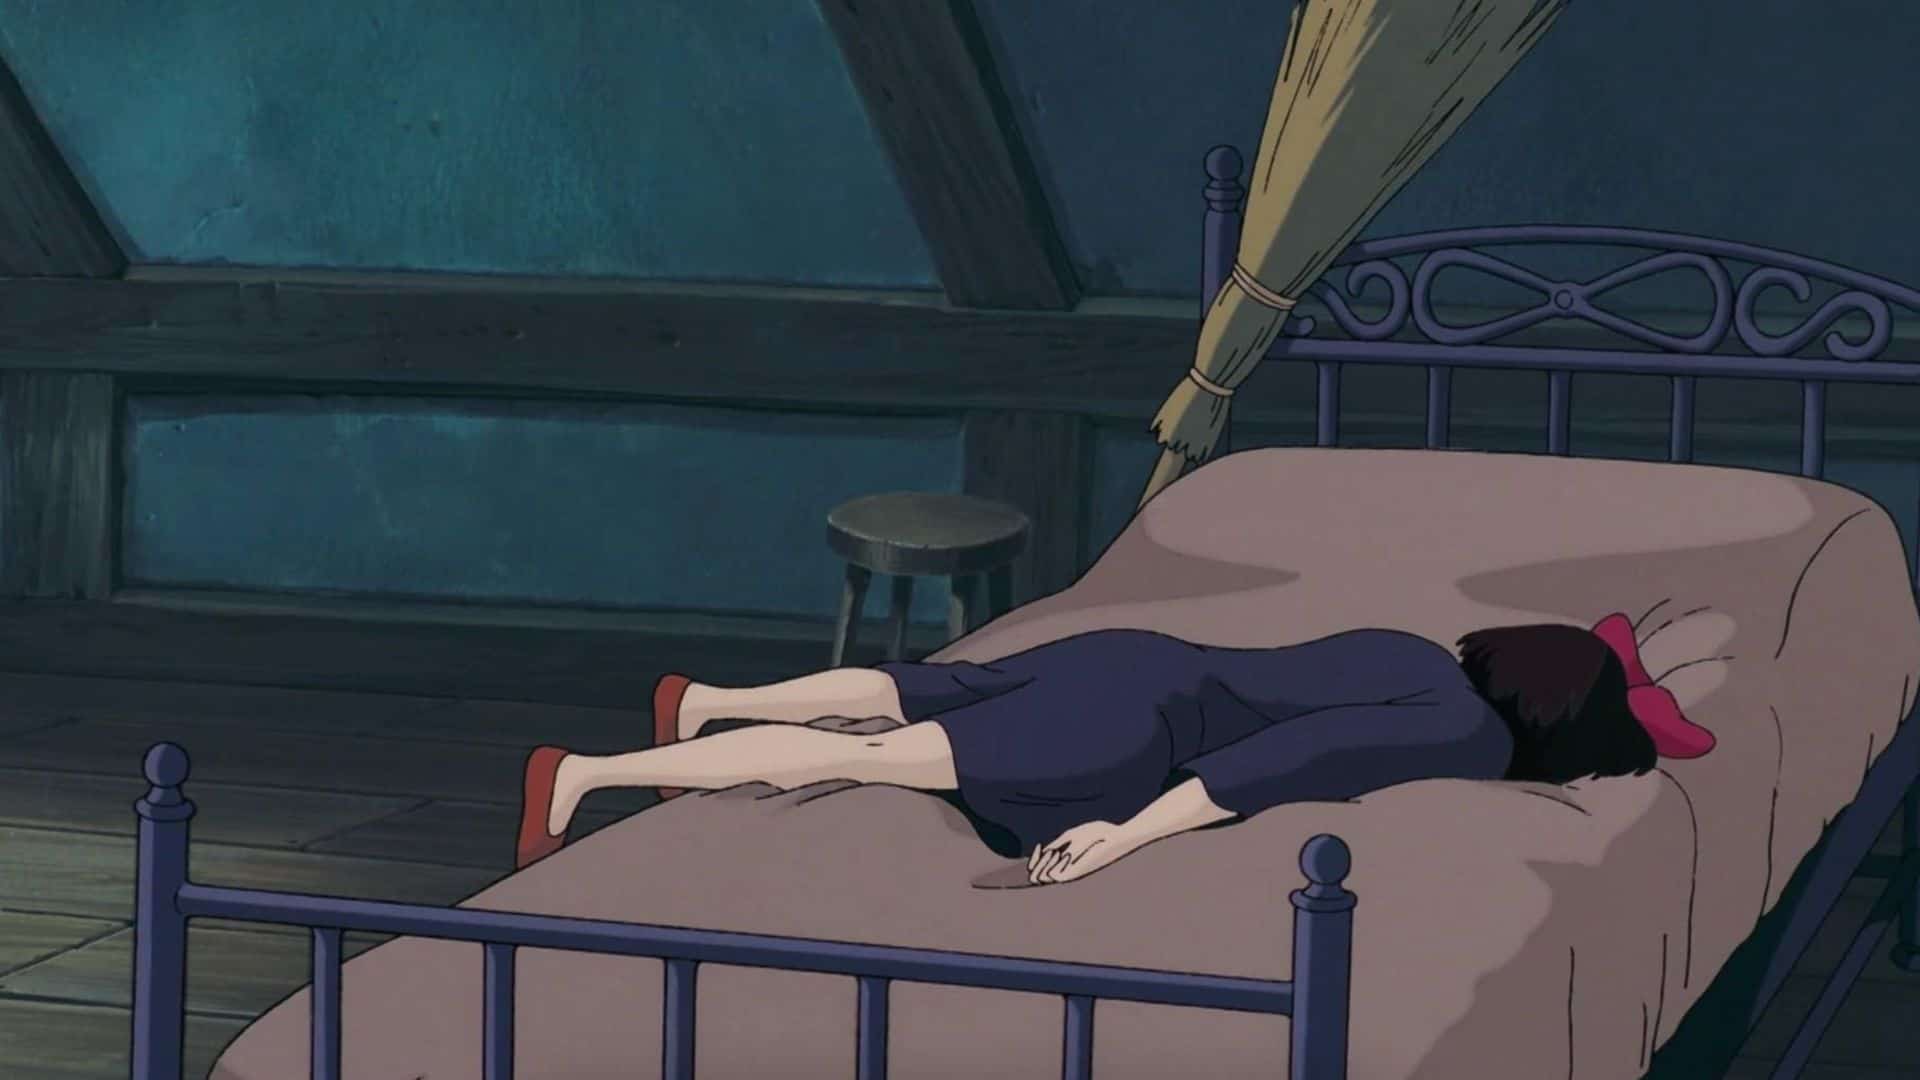 Kiki lies face-down on her bed in this image from Studio Ghibli